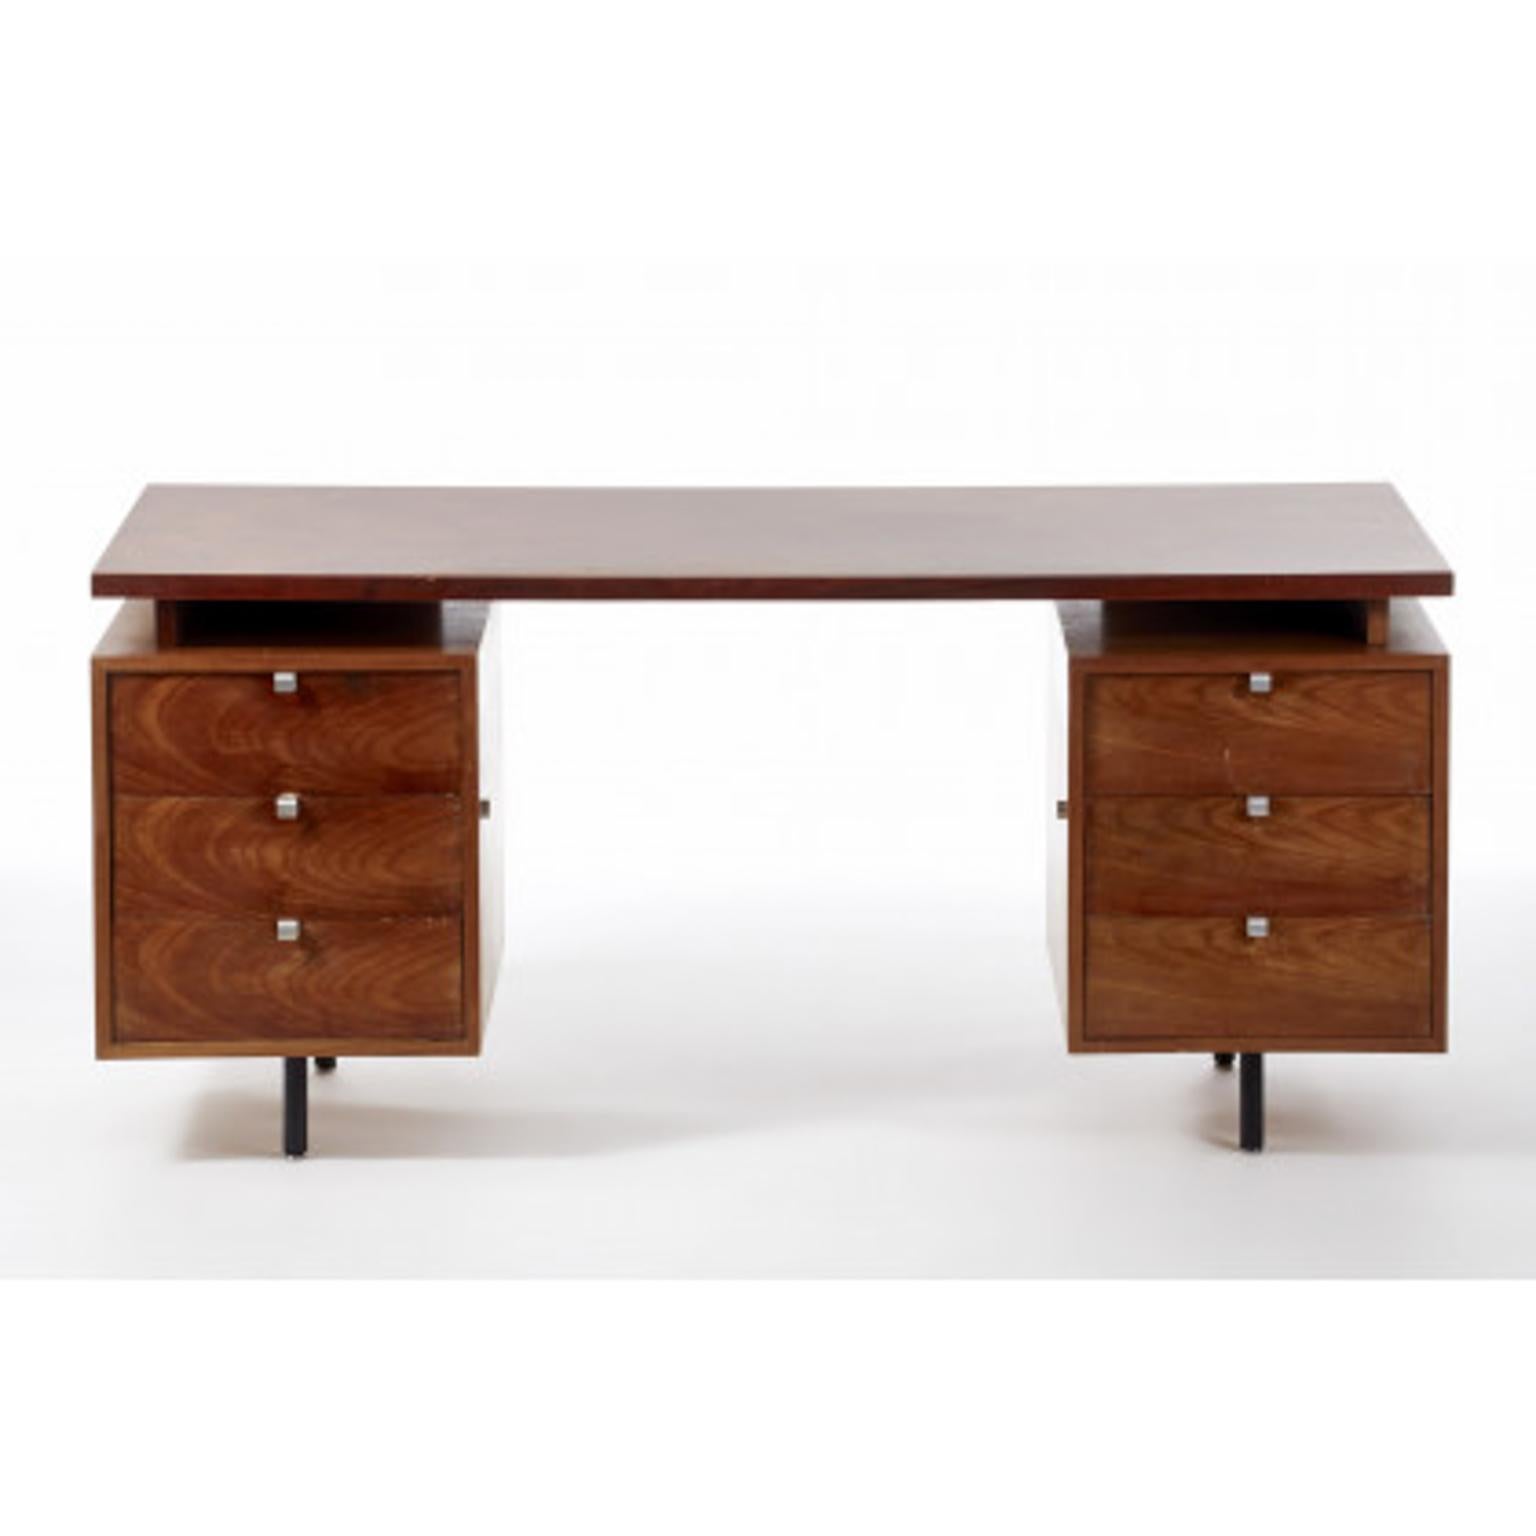 American George Nelson Desk in Rosewood from Herman Miller 1960s United States